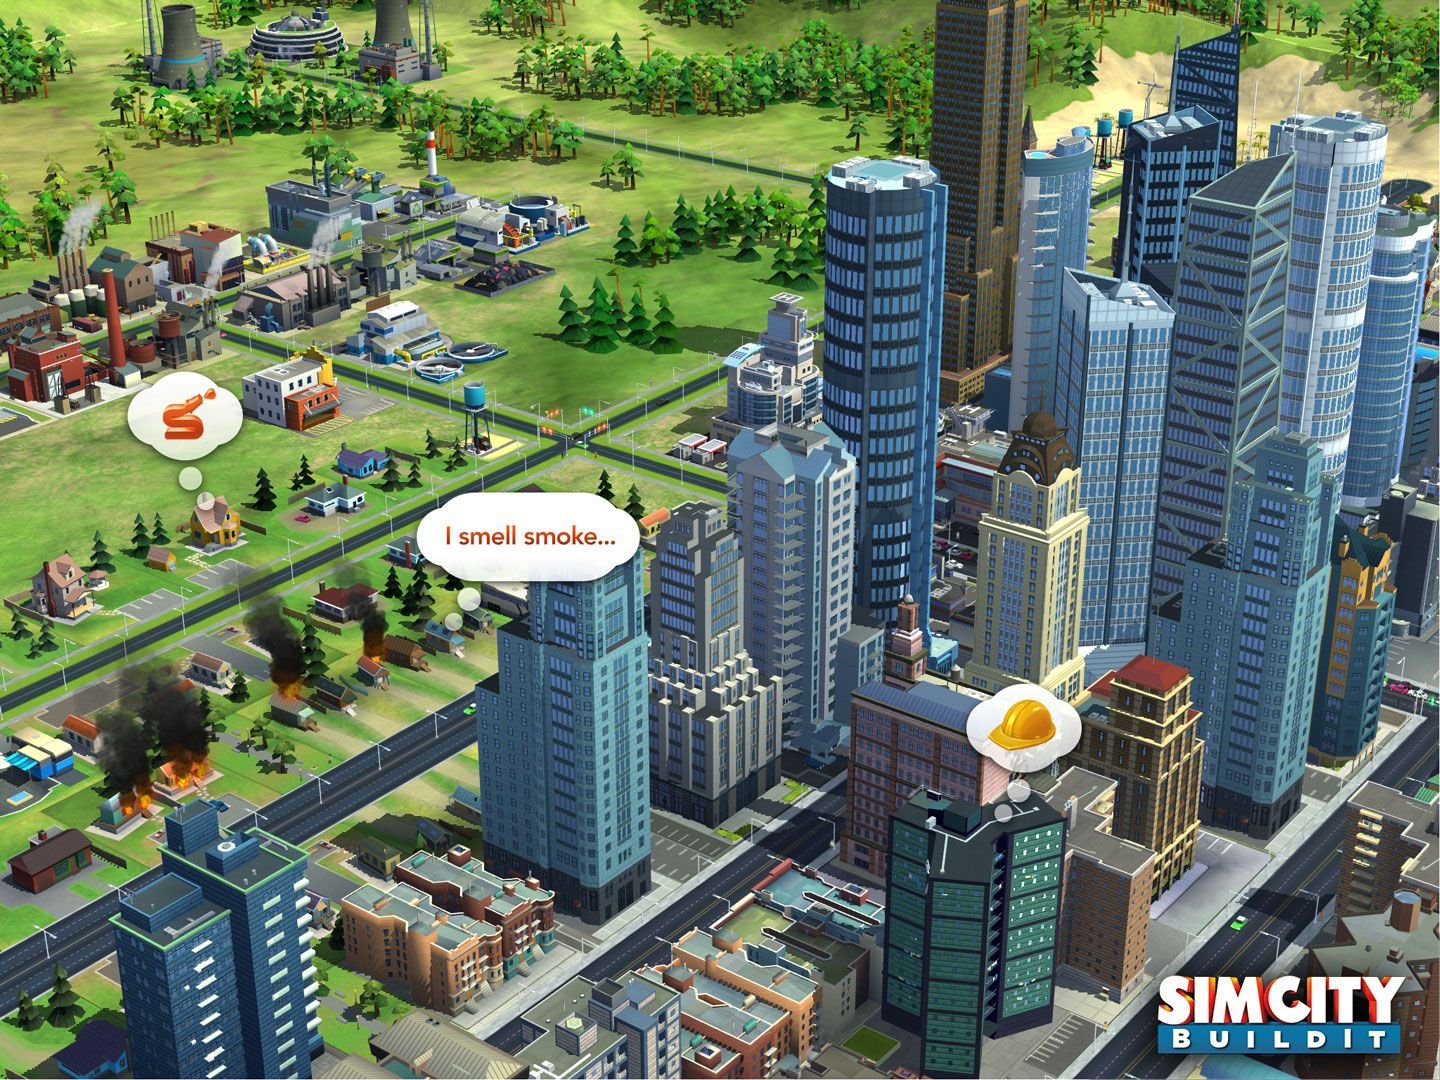 all new simcity coming to ipad iphone and android soon simcity buildit created for touchscreens image 1